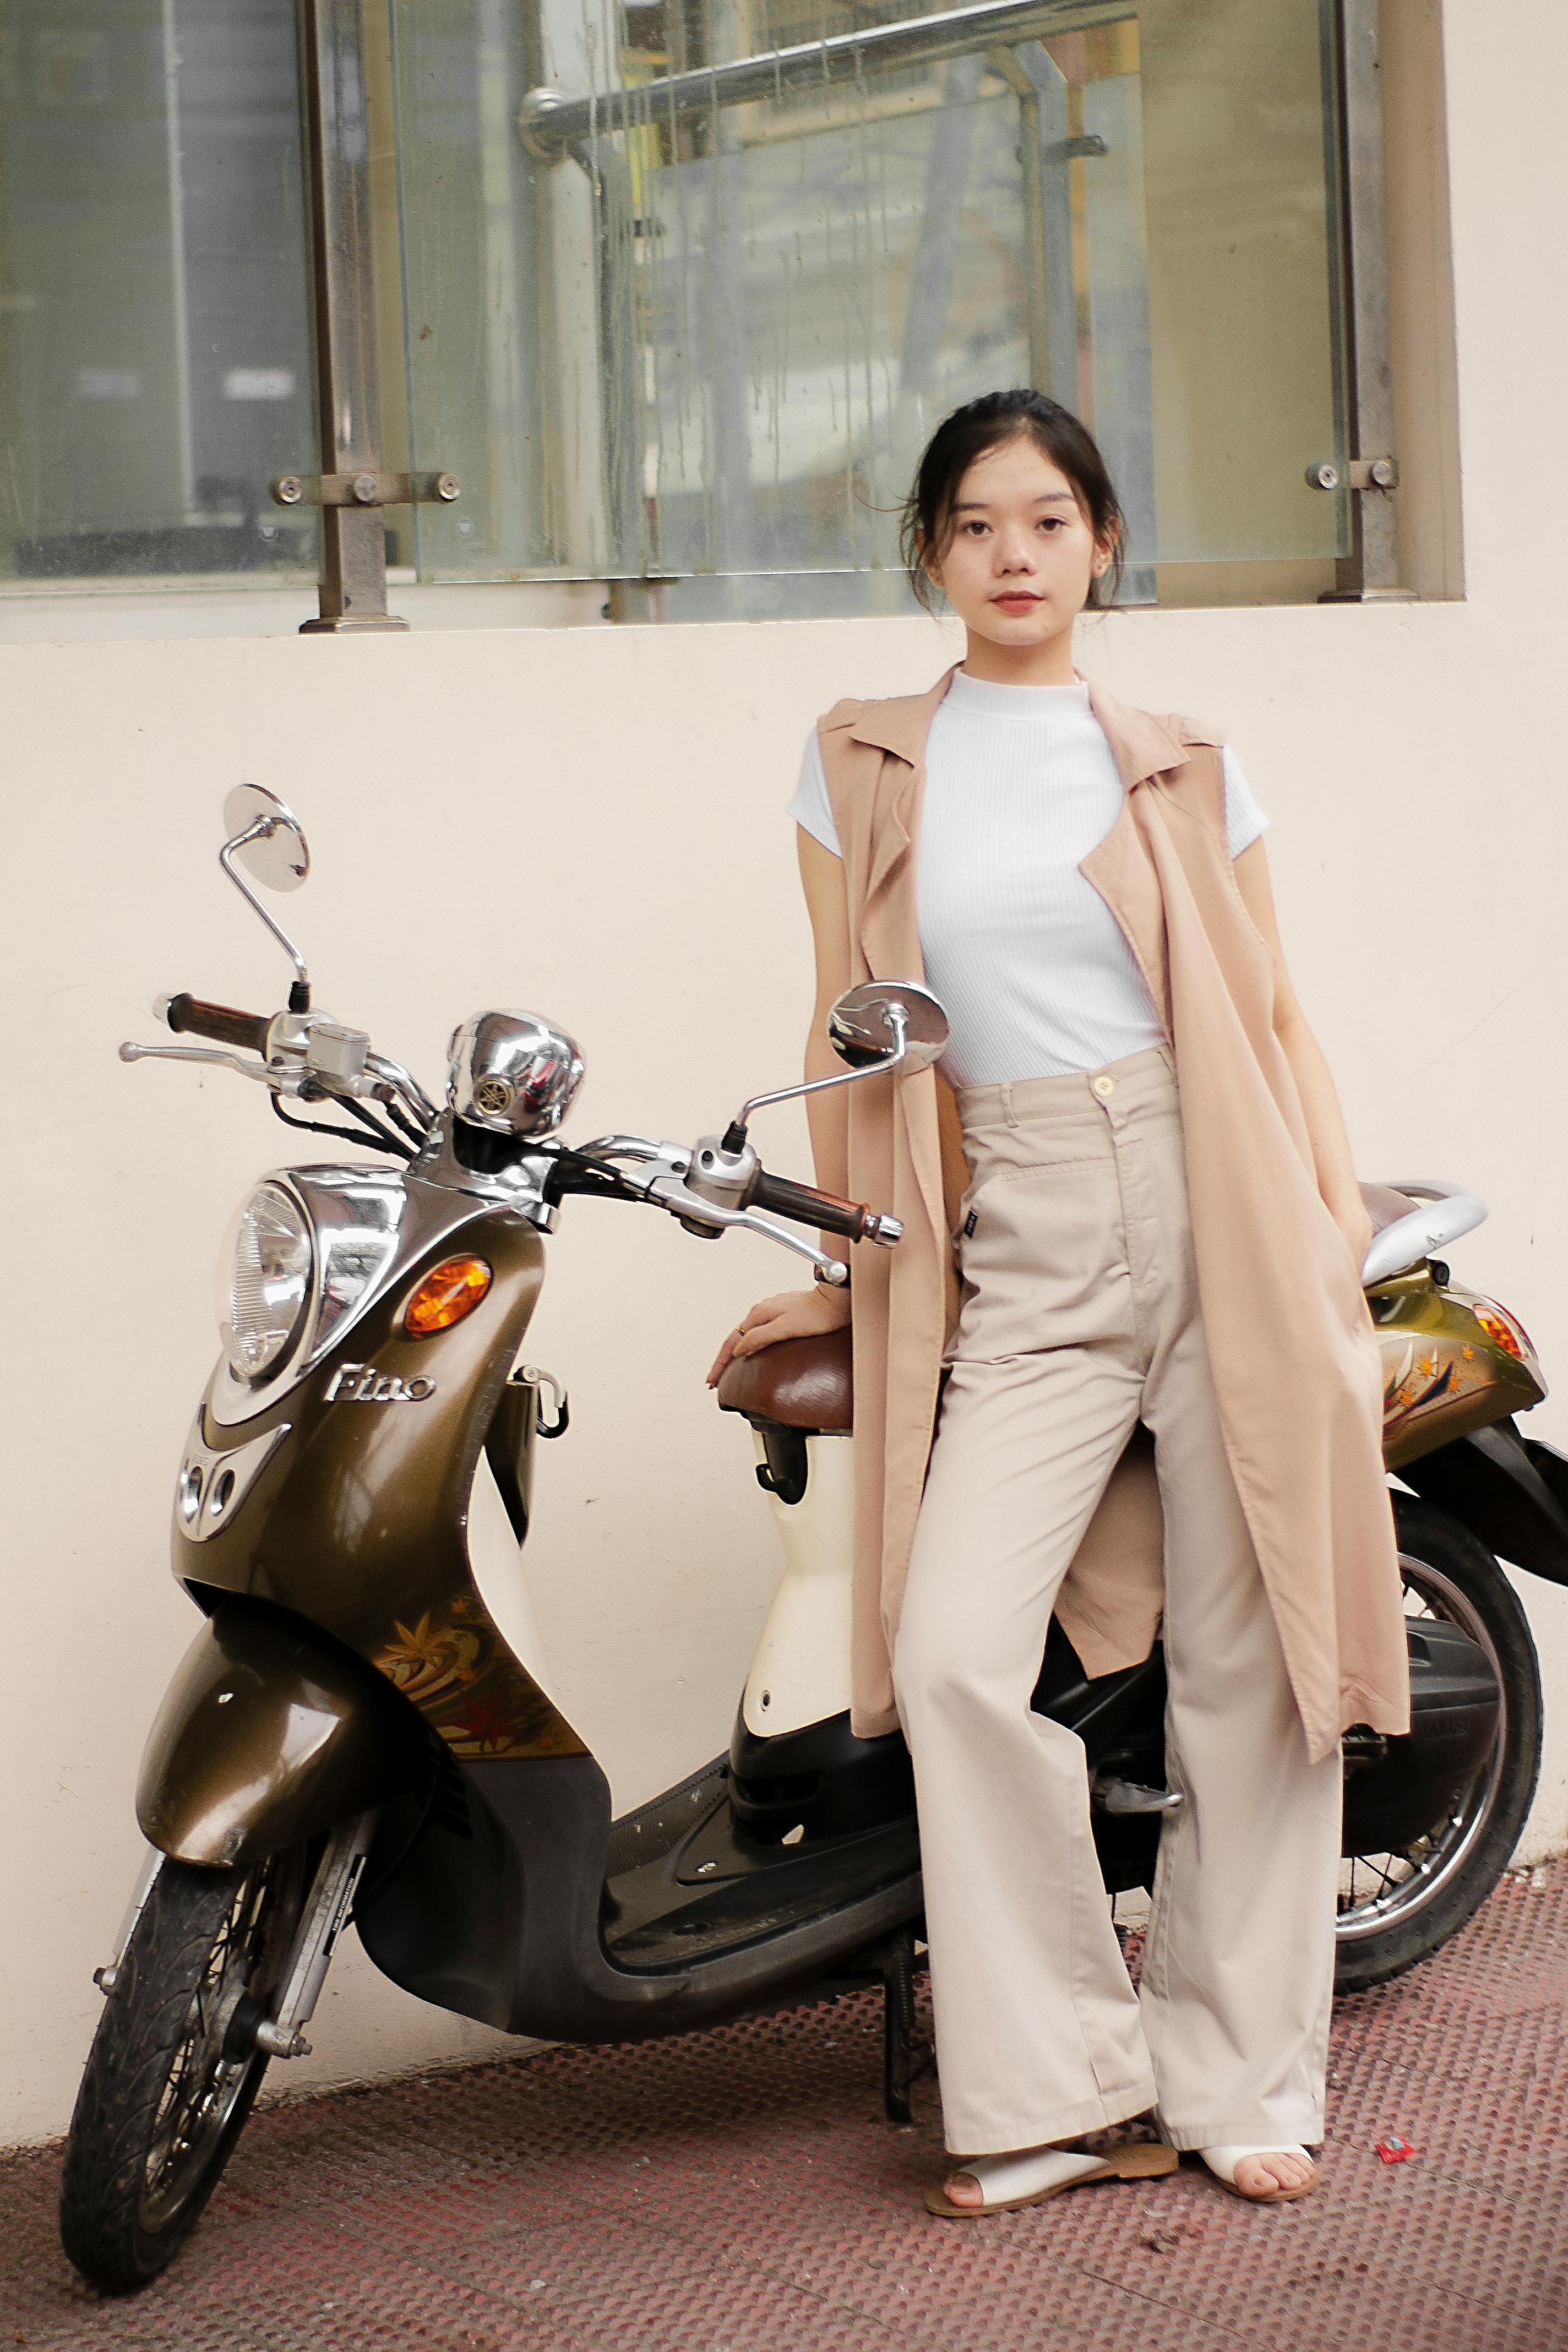 Stylish young ethnic woman in white shirt and leather jacket · Free ...